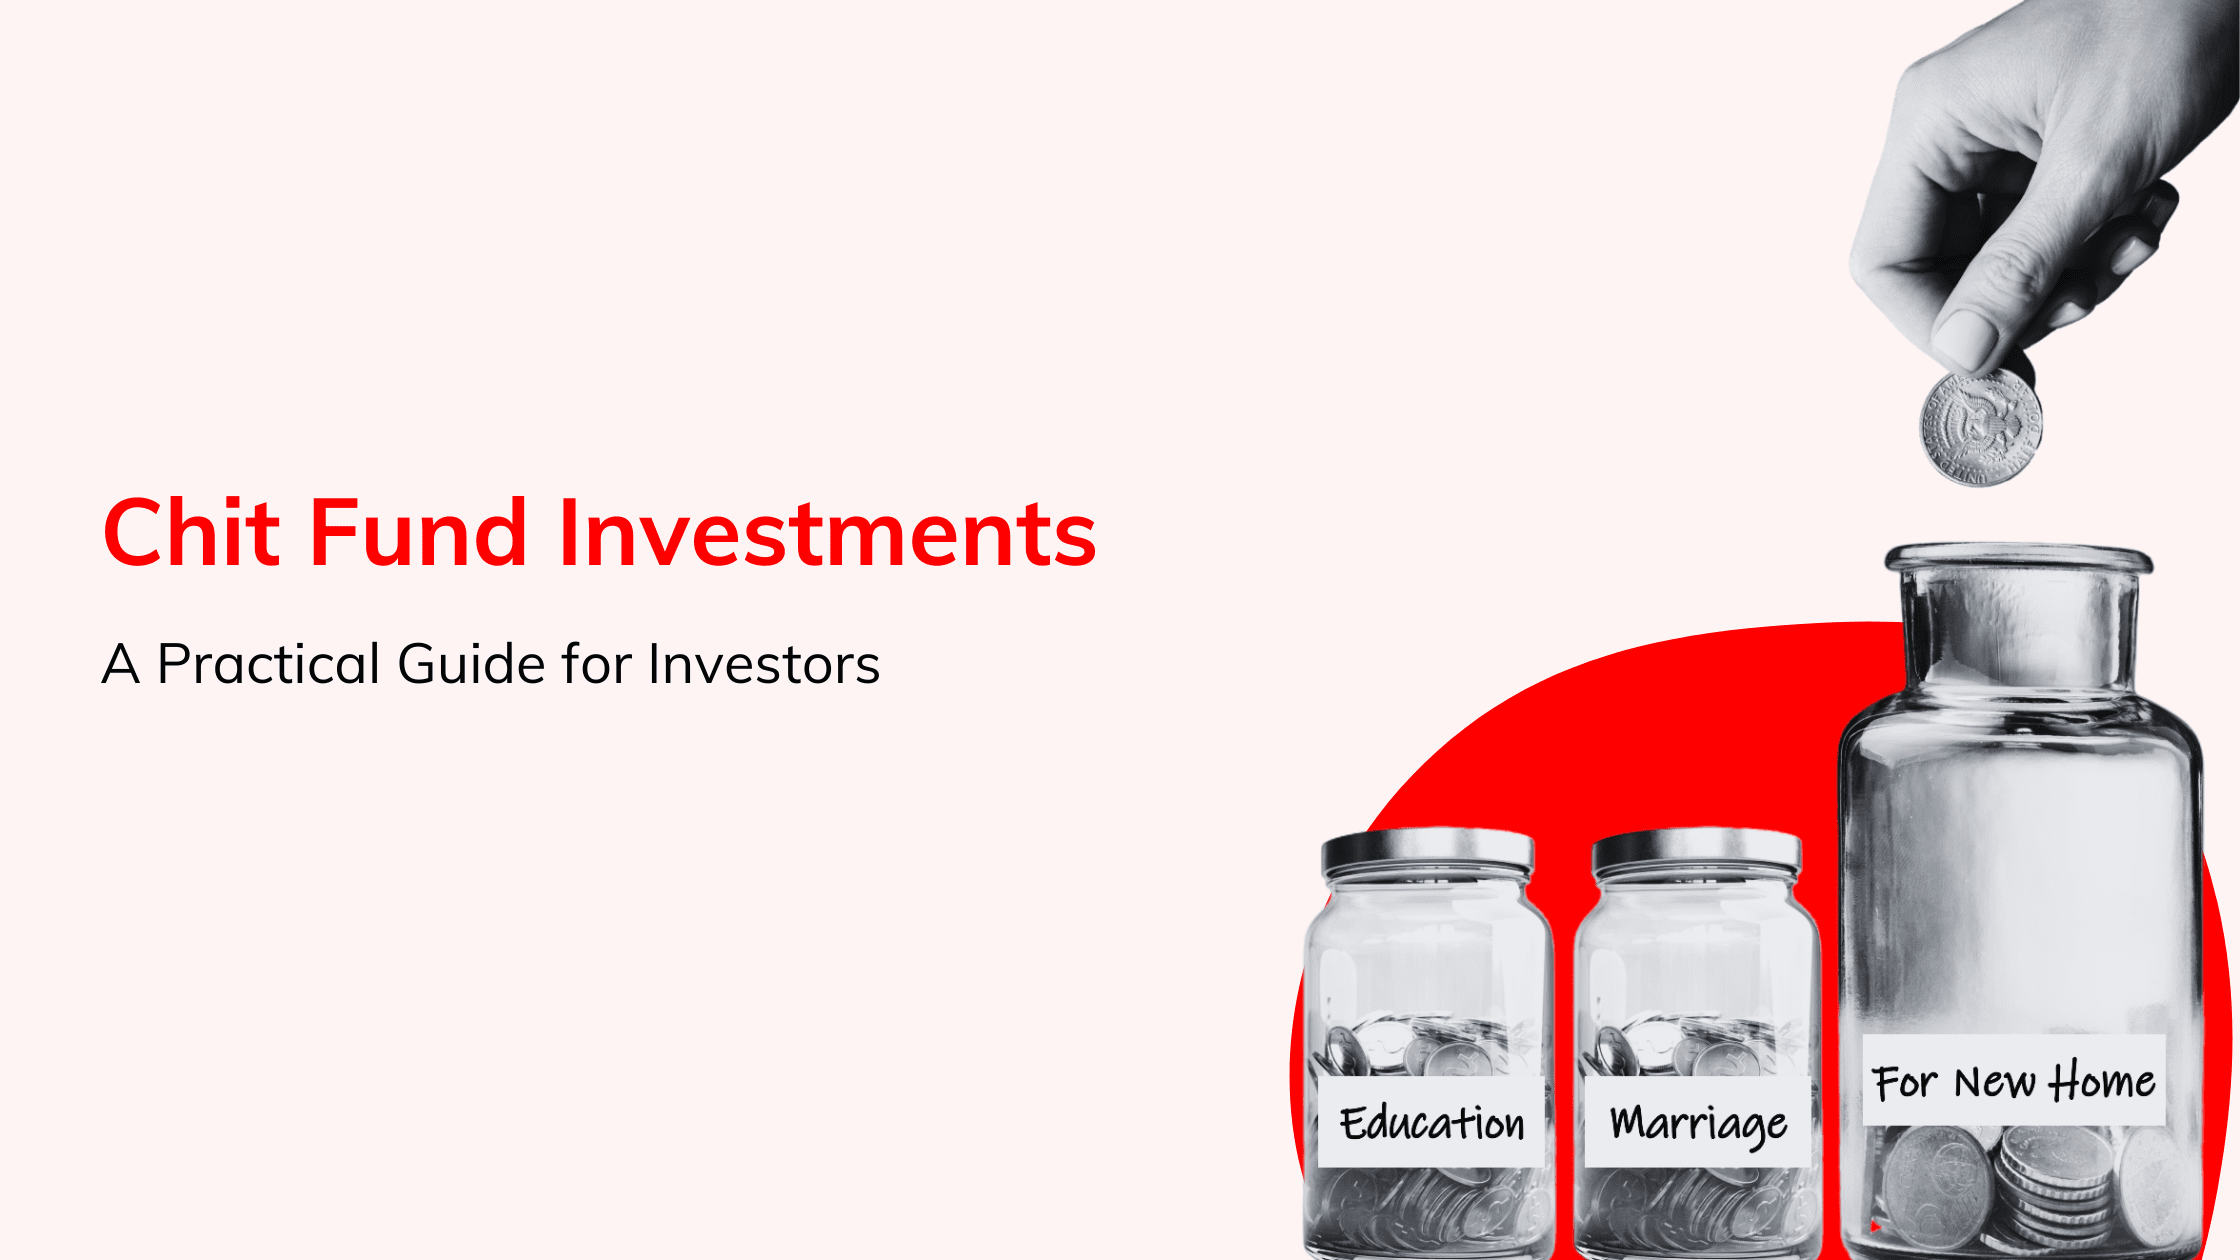 Chitfund investments-guide